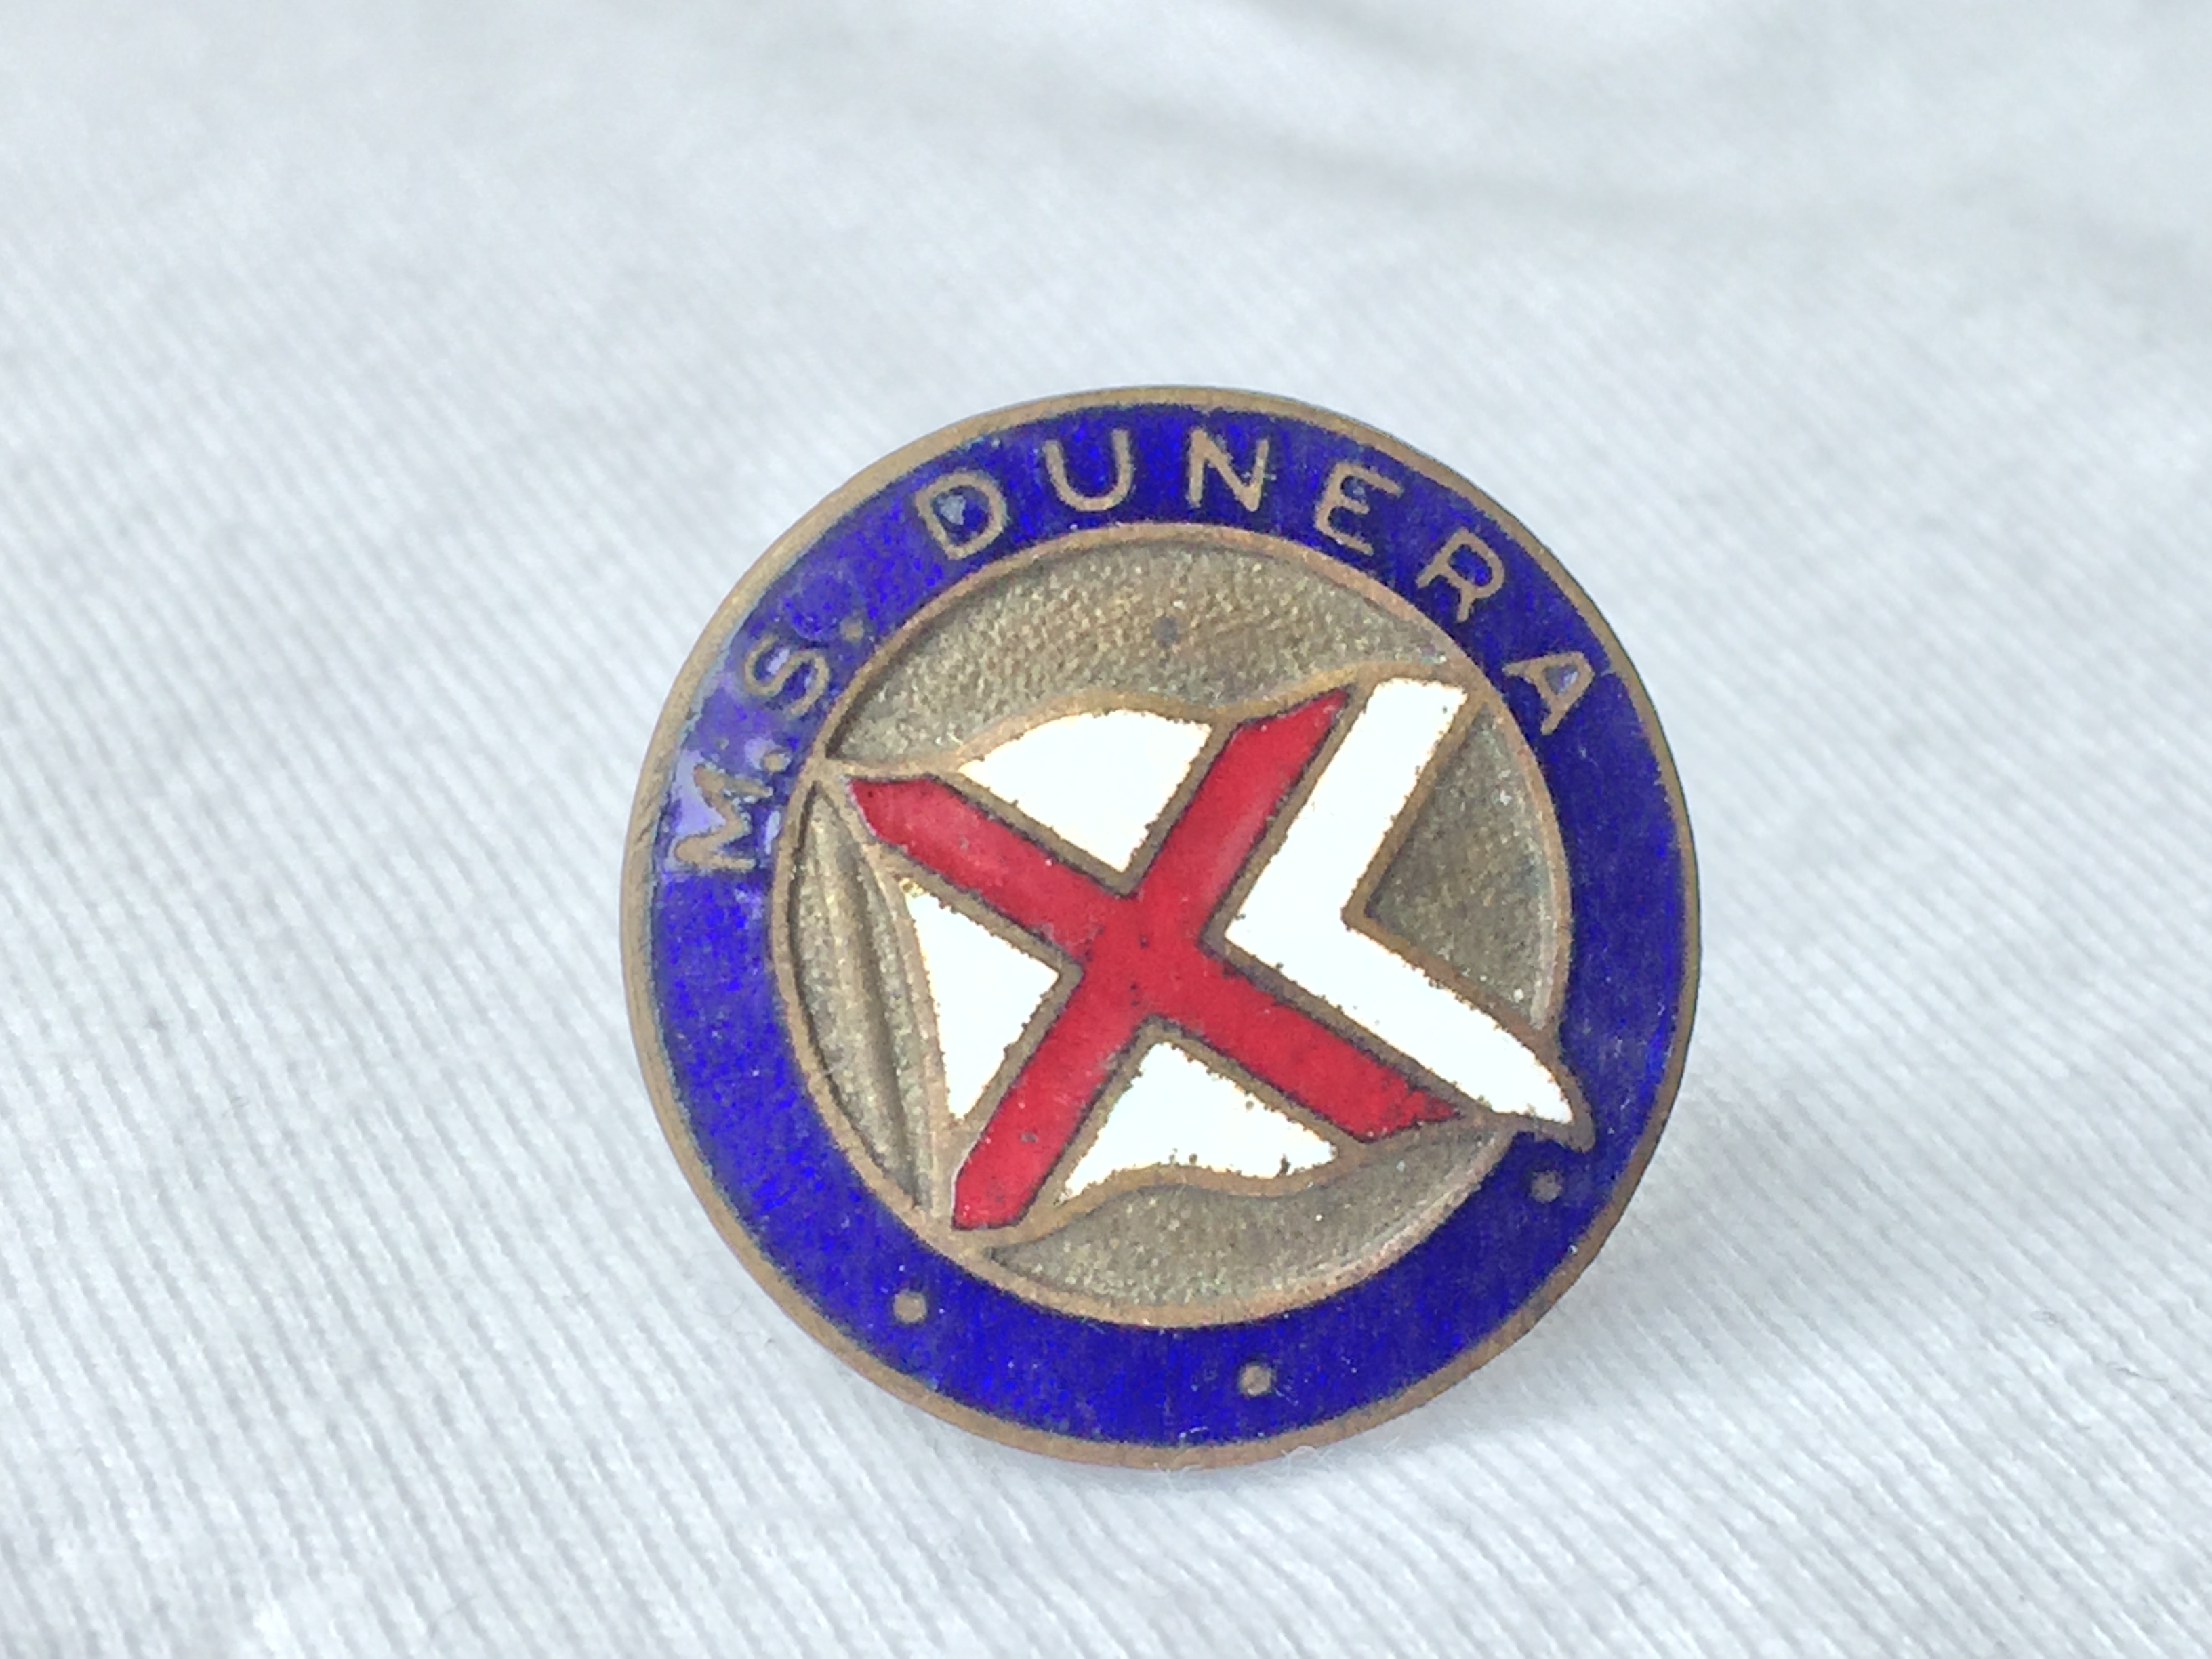 LAPEL PIN BADGE FROM THE BRITISH INDIA STEAM NAVIGATION COMPANY VESSEL THE MS DUNERA